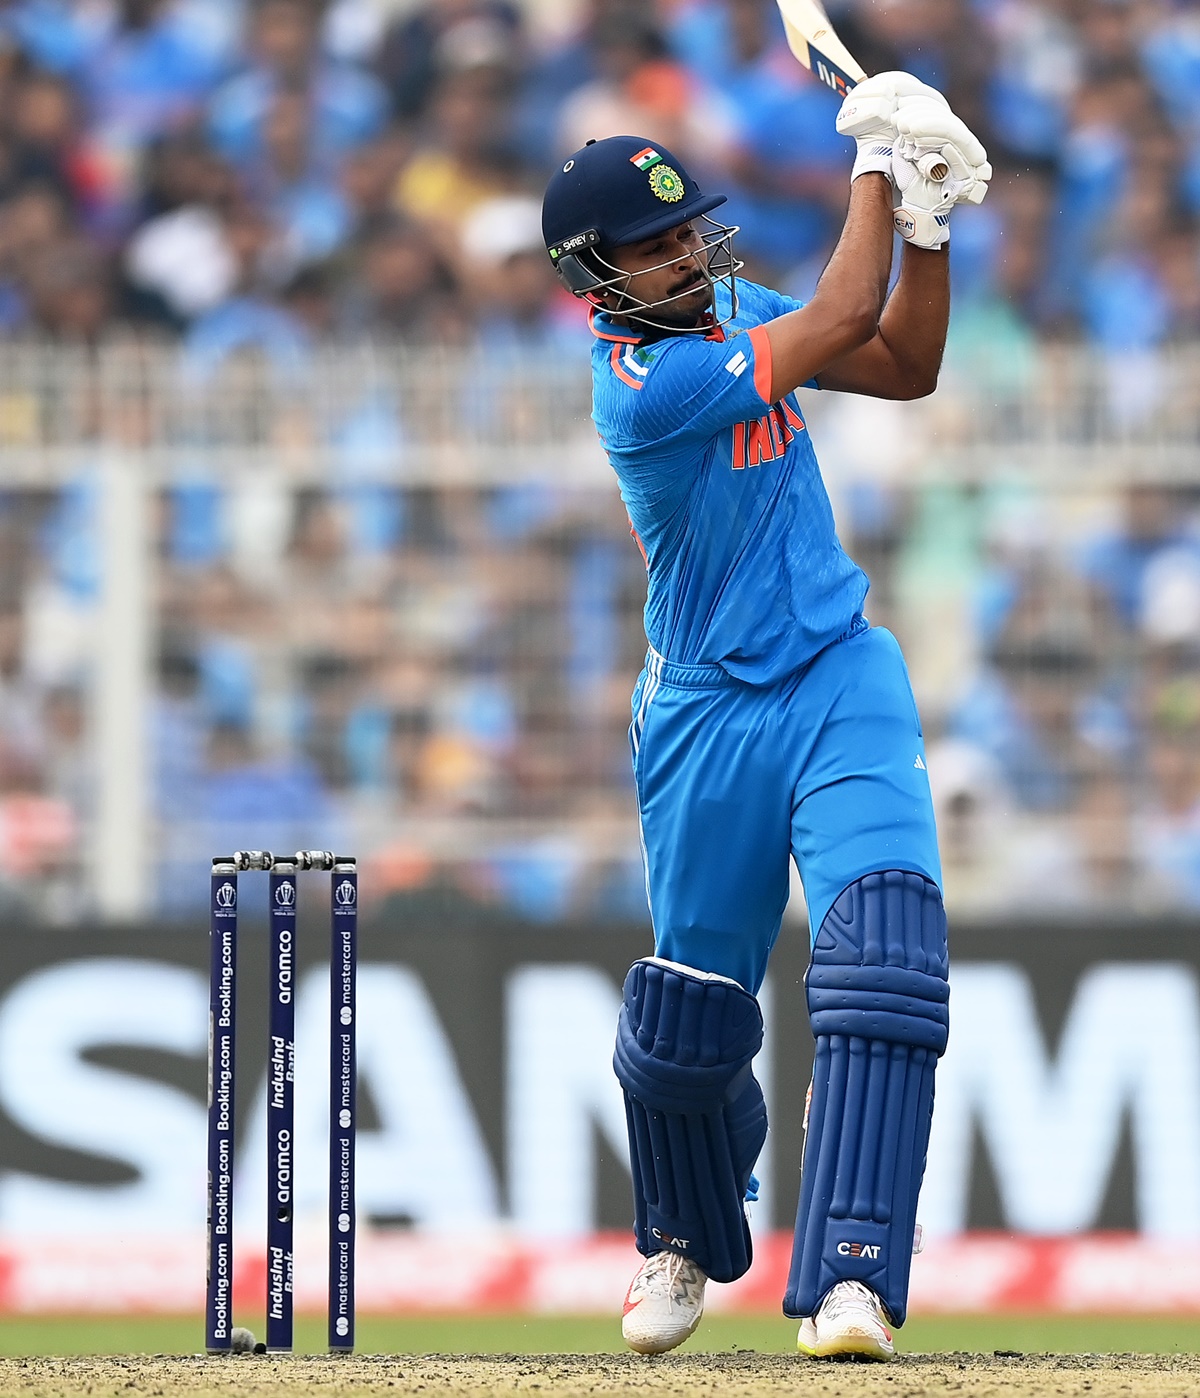 Shreyas Iyer came good with a 77 and dropped anchor with Virat Kohli to help the team rebuild the innings. Rohit Sharma said Iyer has repaid the faith shown in him